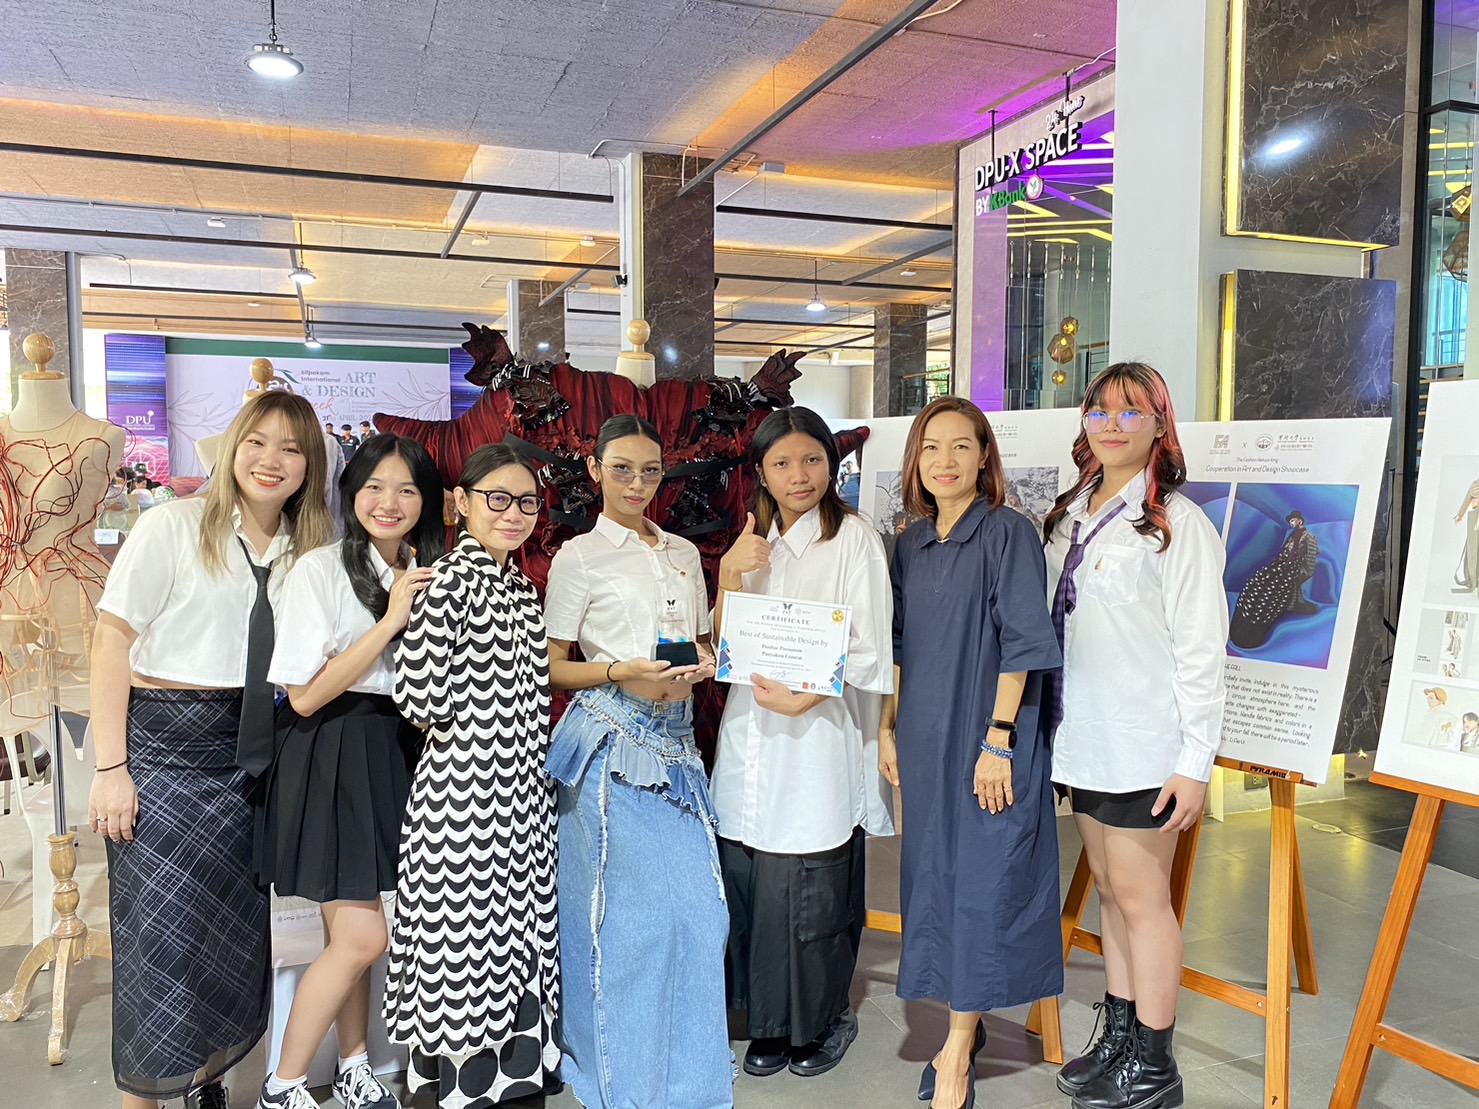 Students from the Fashion Design Department won the “Best of Sustainable Design” award